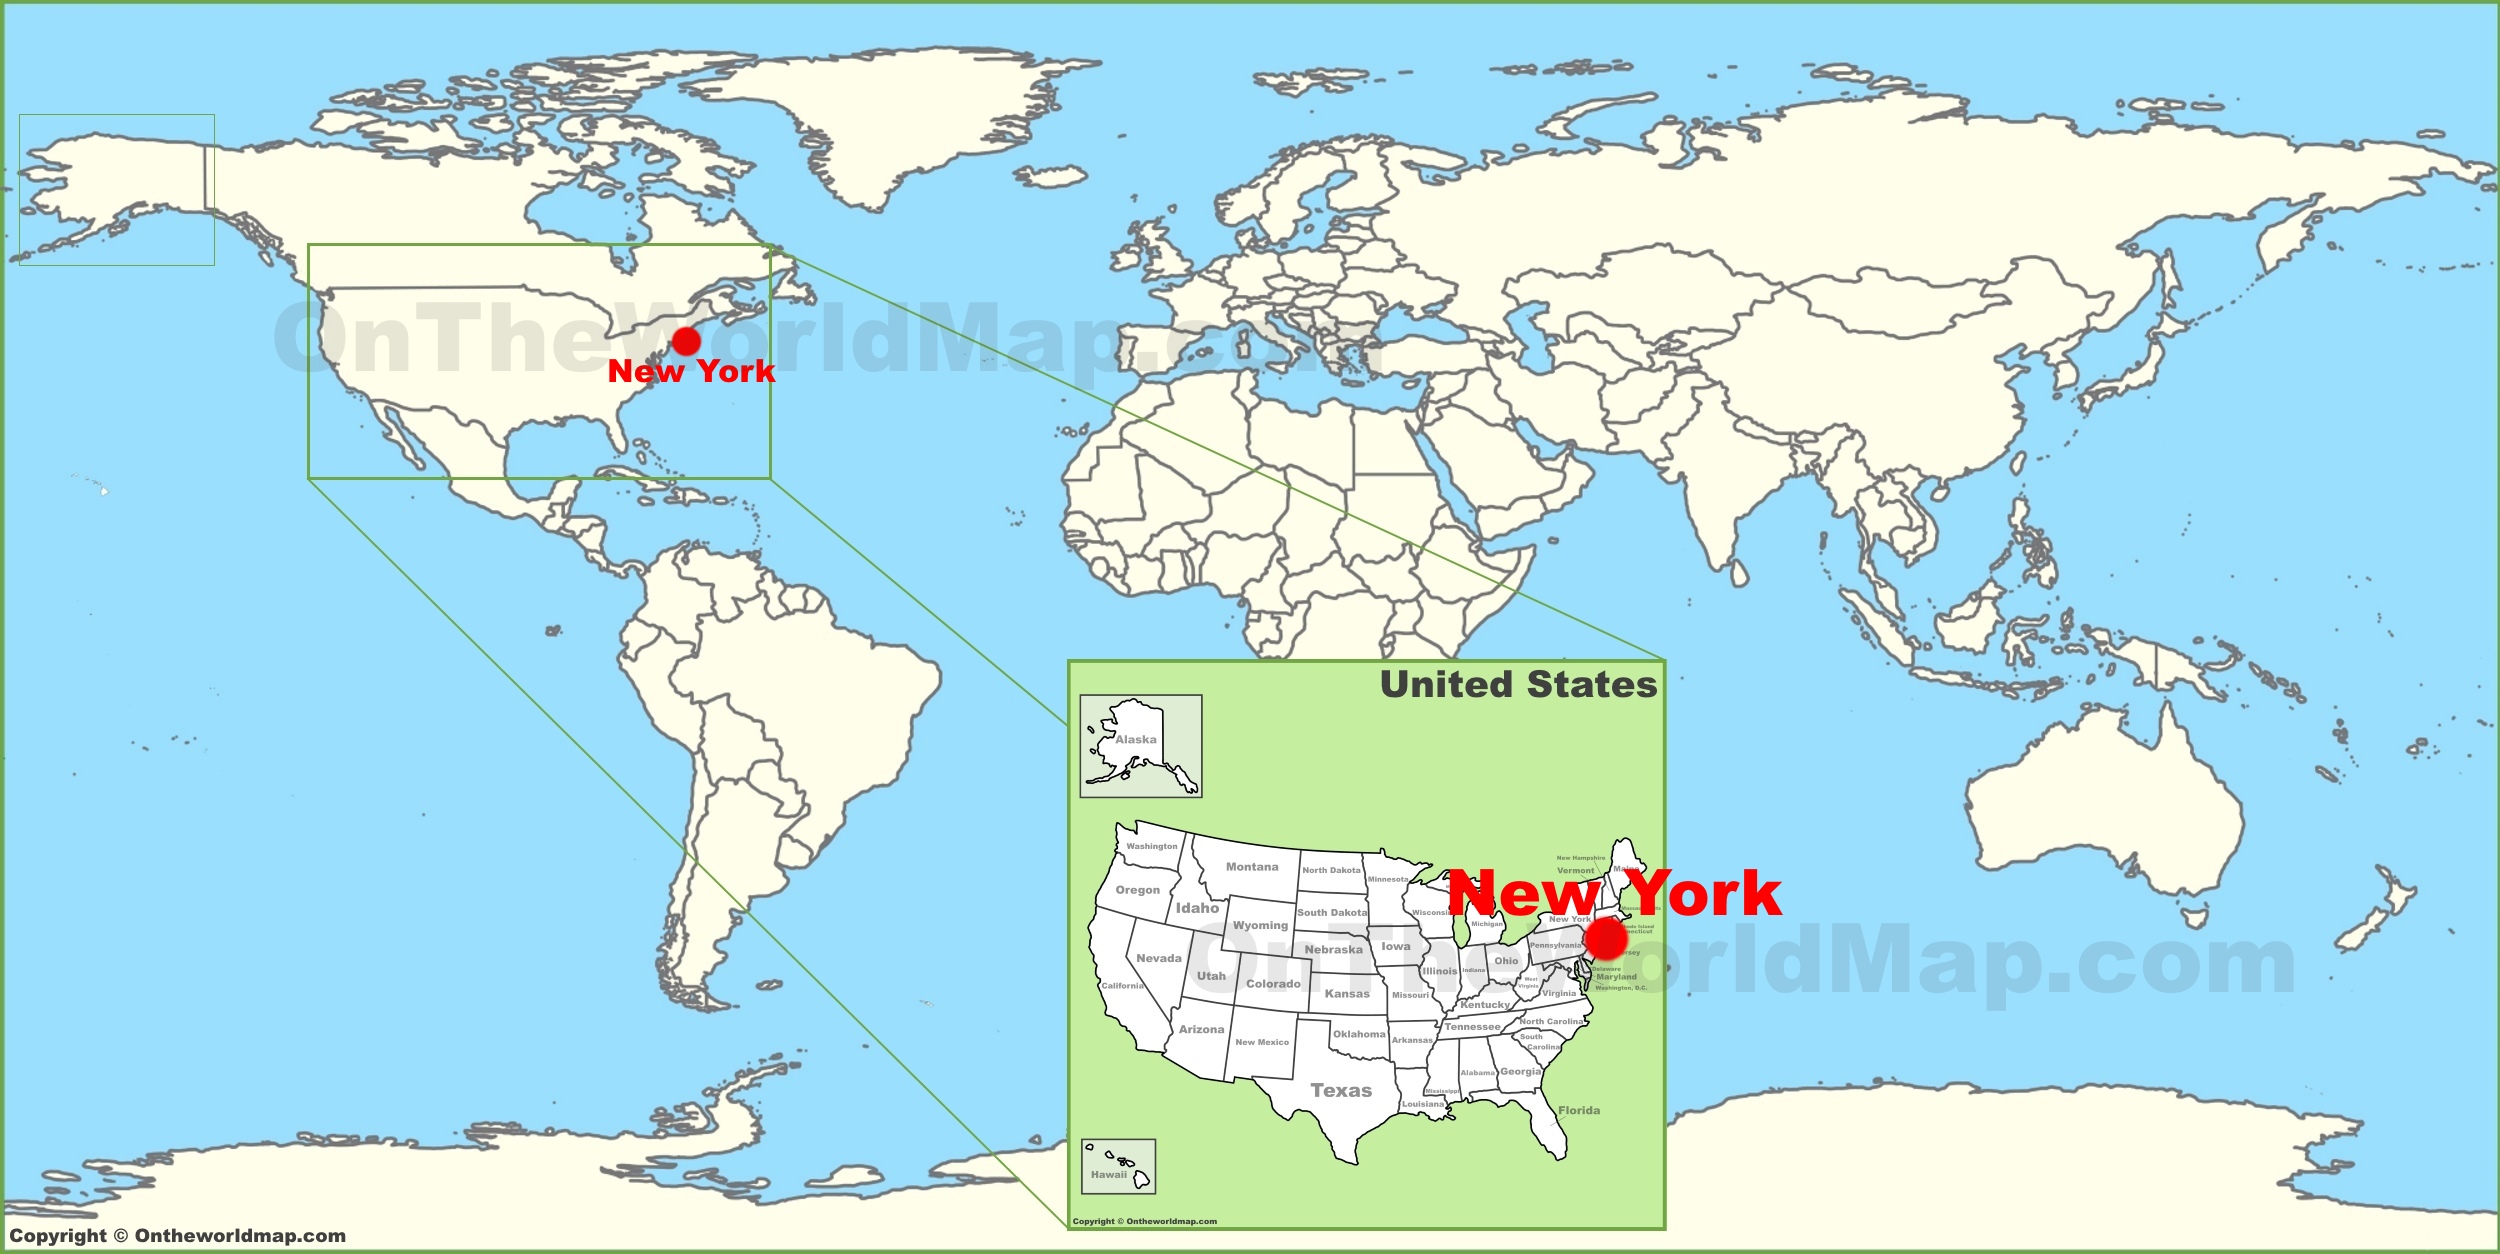 New York City On The World Map